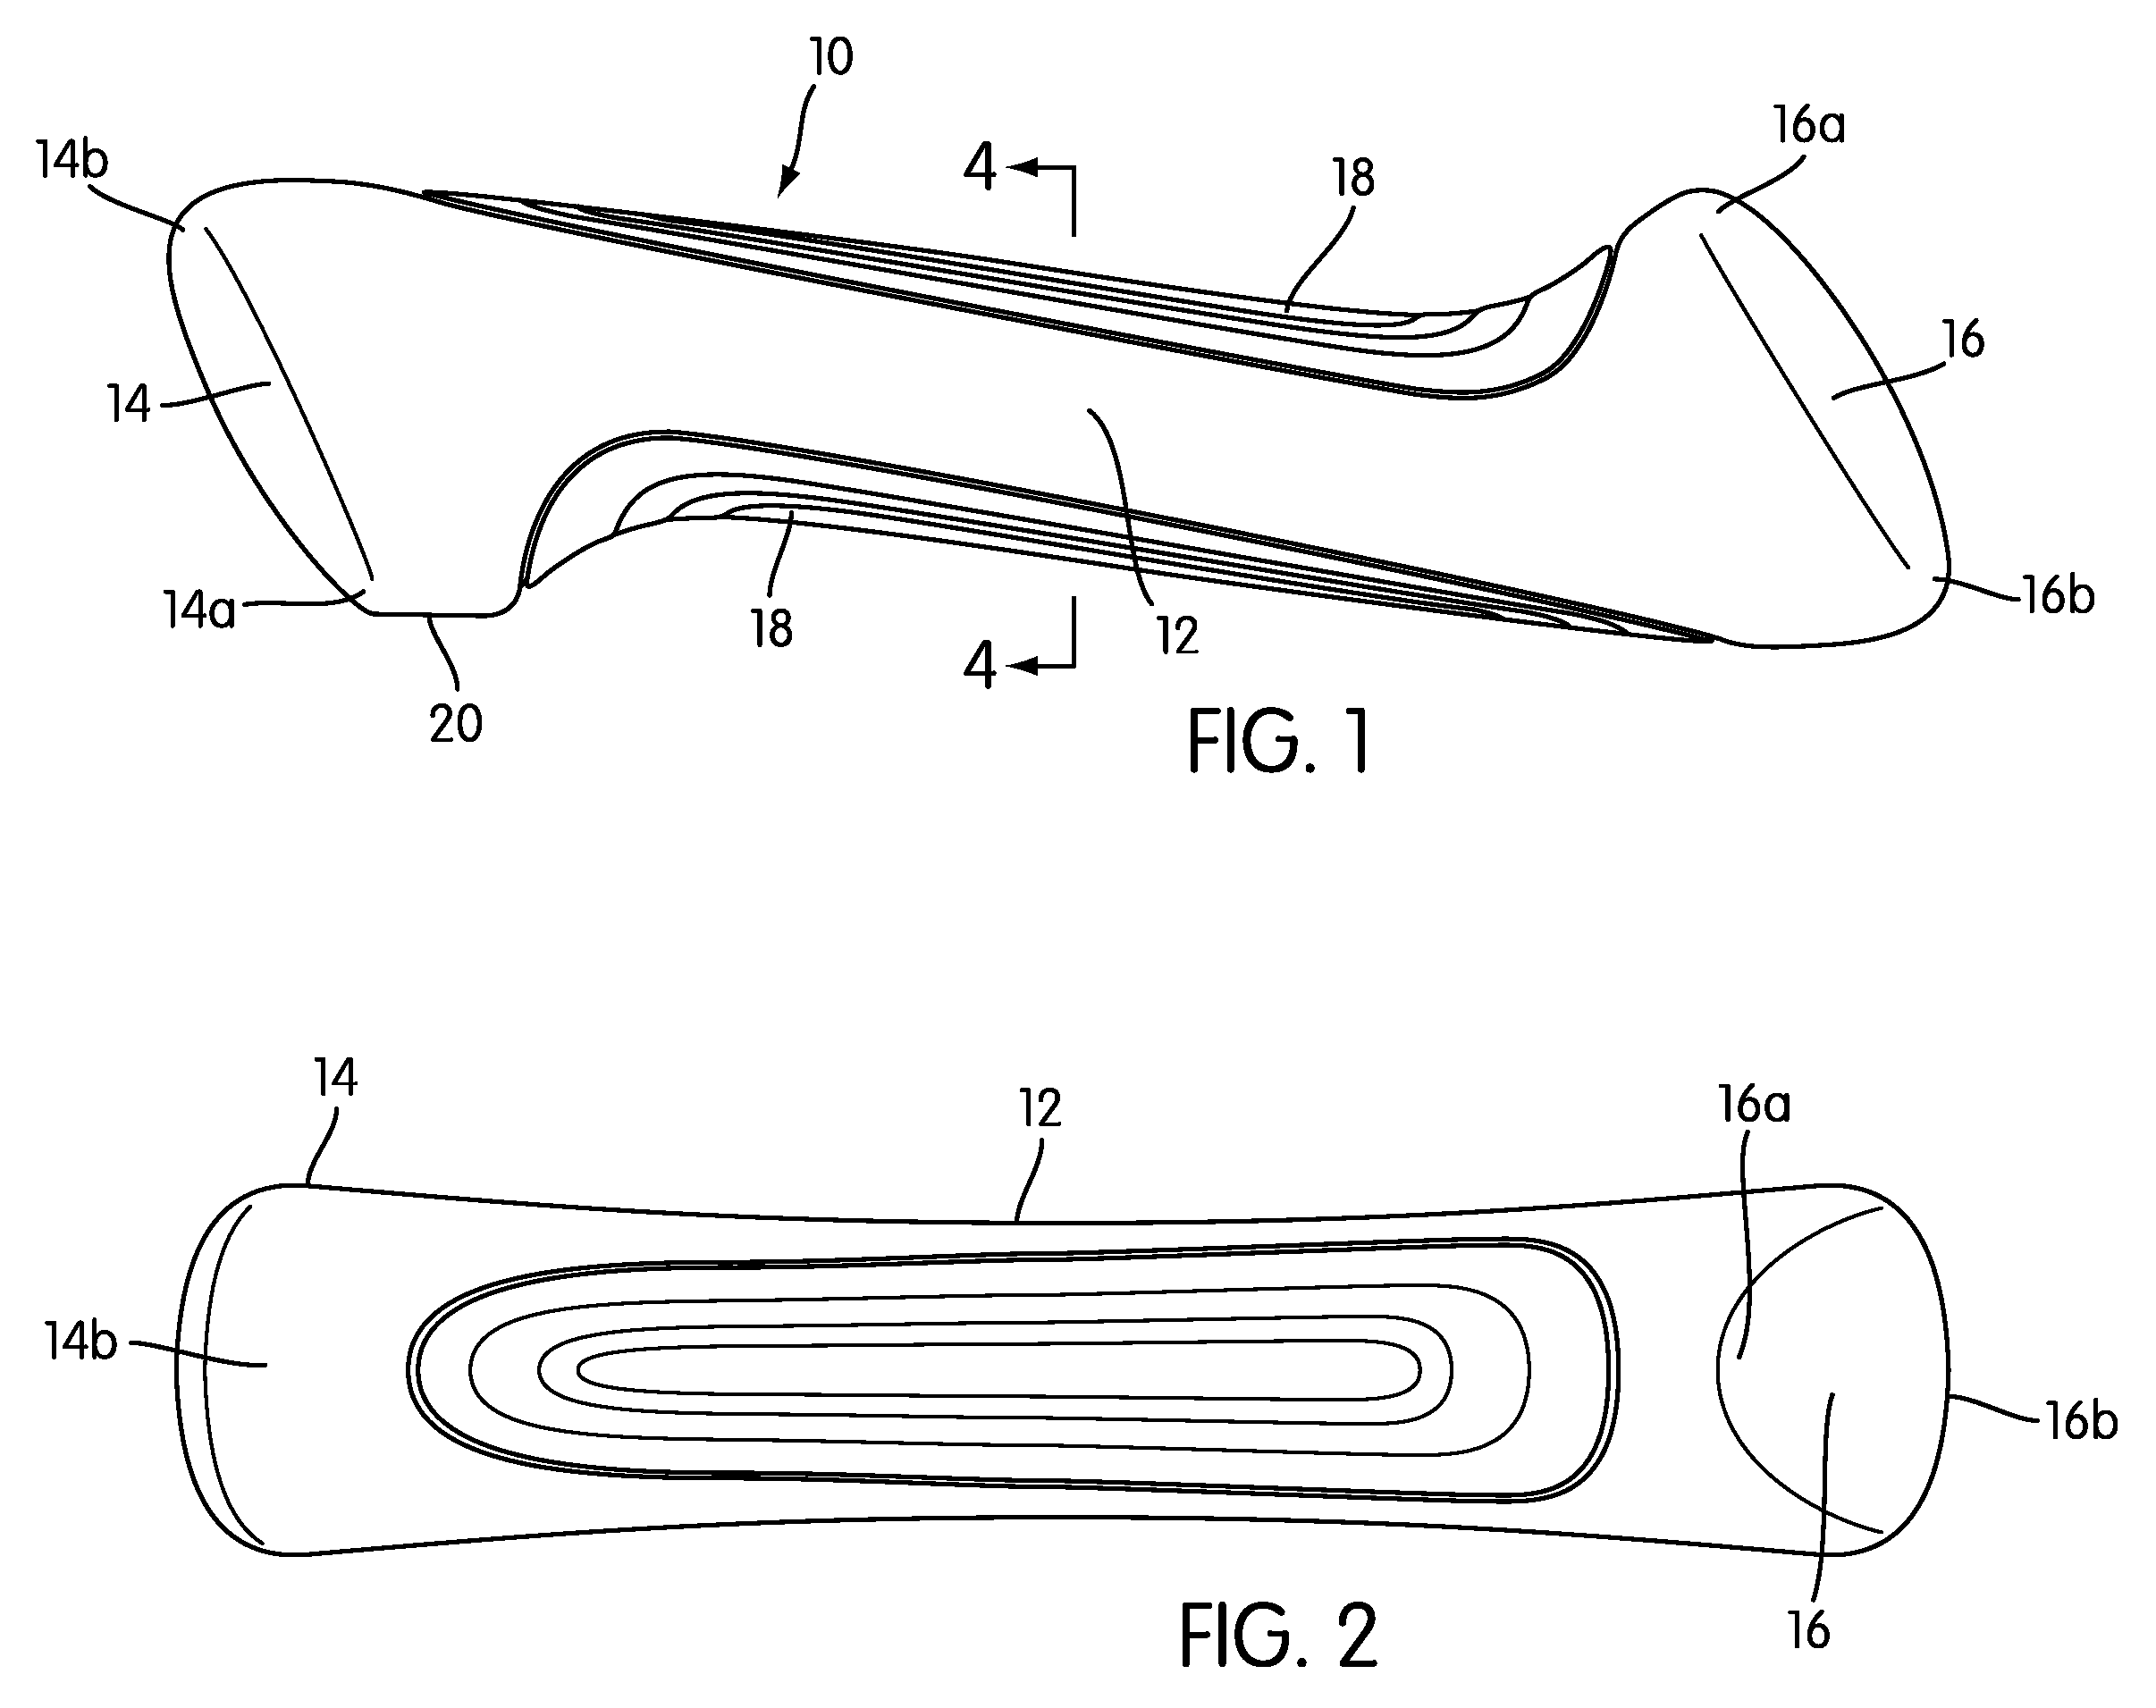 Hand weight with contoured opposing weight protrusions